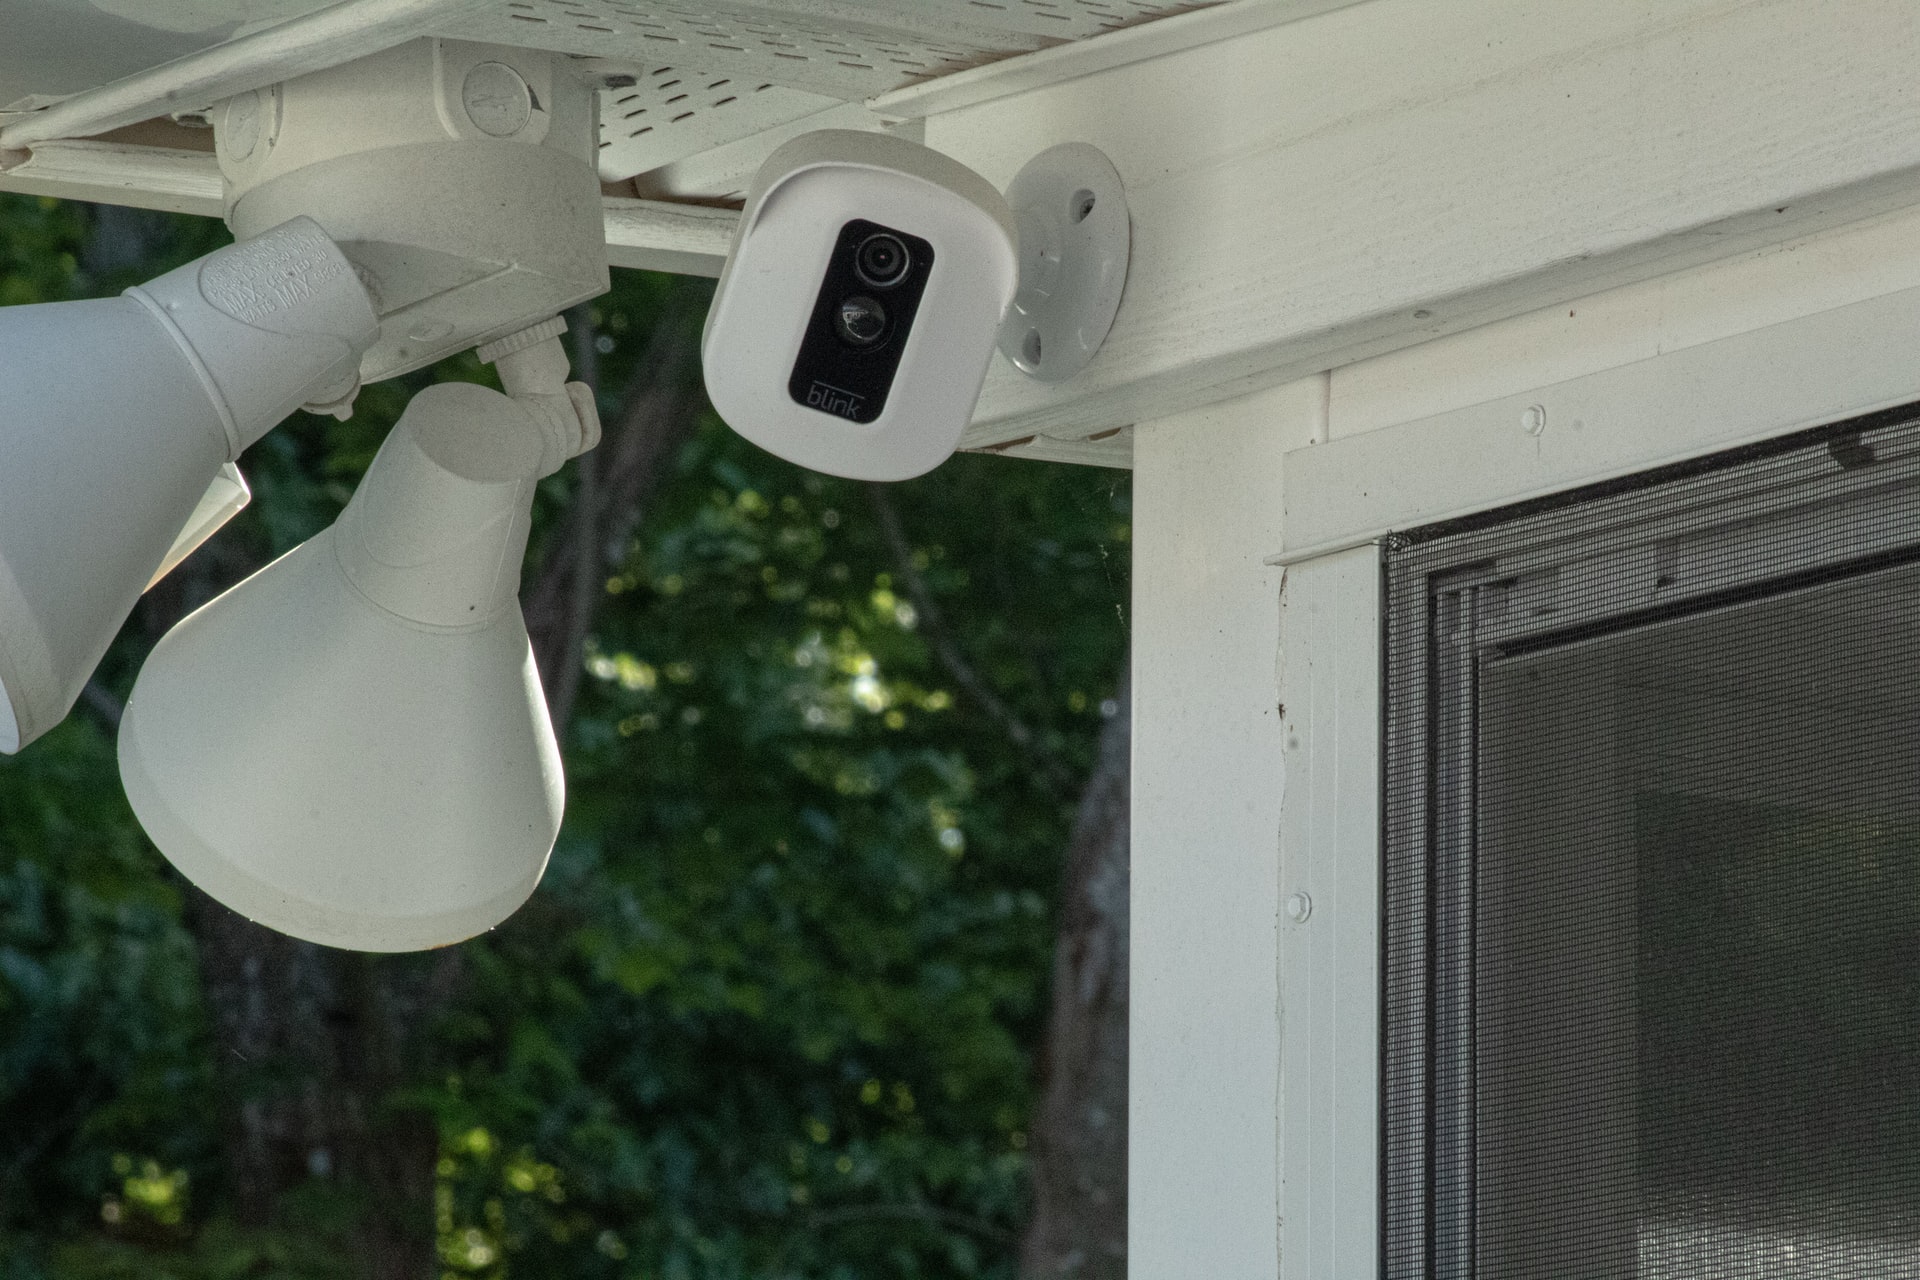 All the Data 's Ring Cameras Collect About You